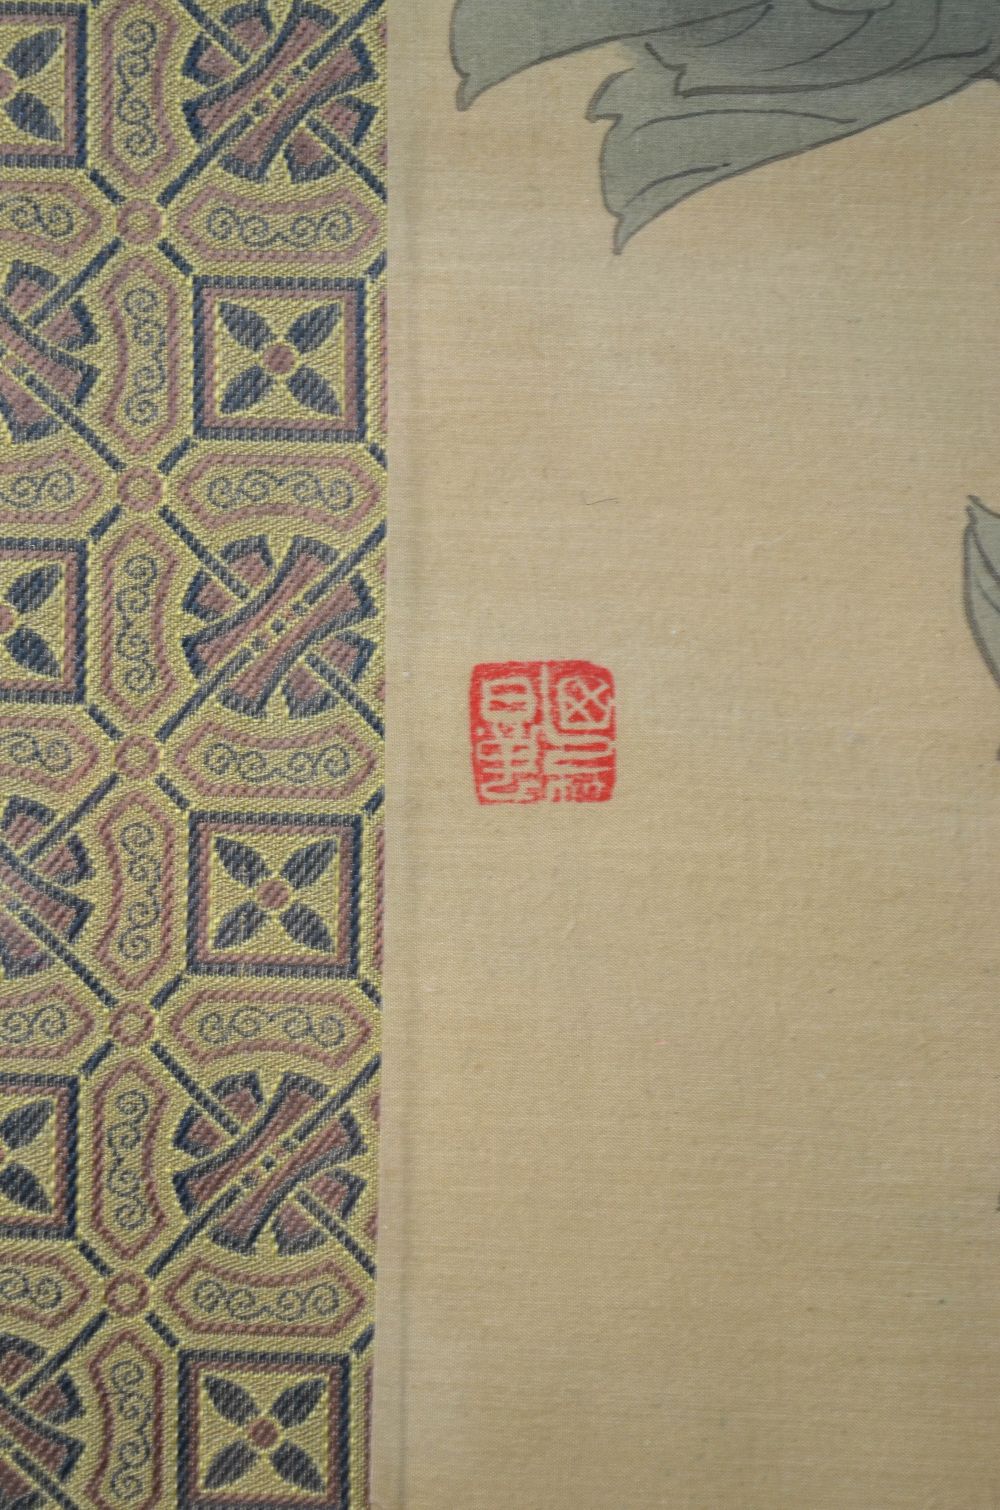 A Chinese picture on textile of a butter - Image 2 of 4